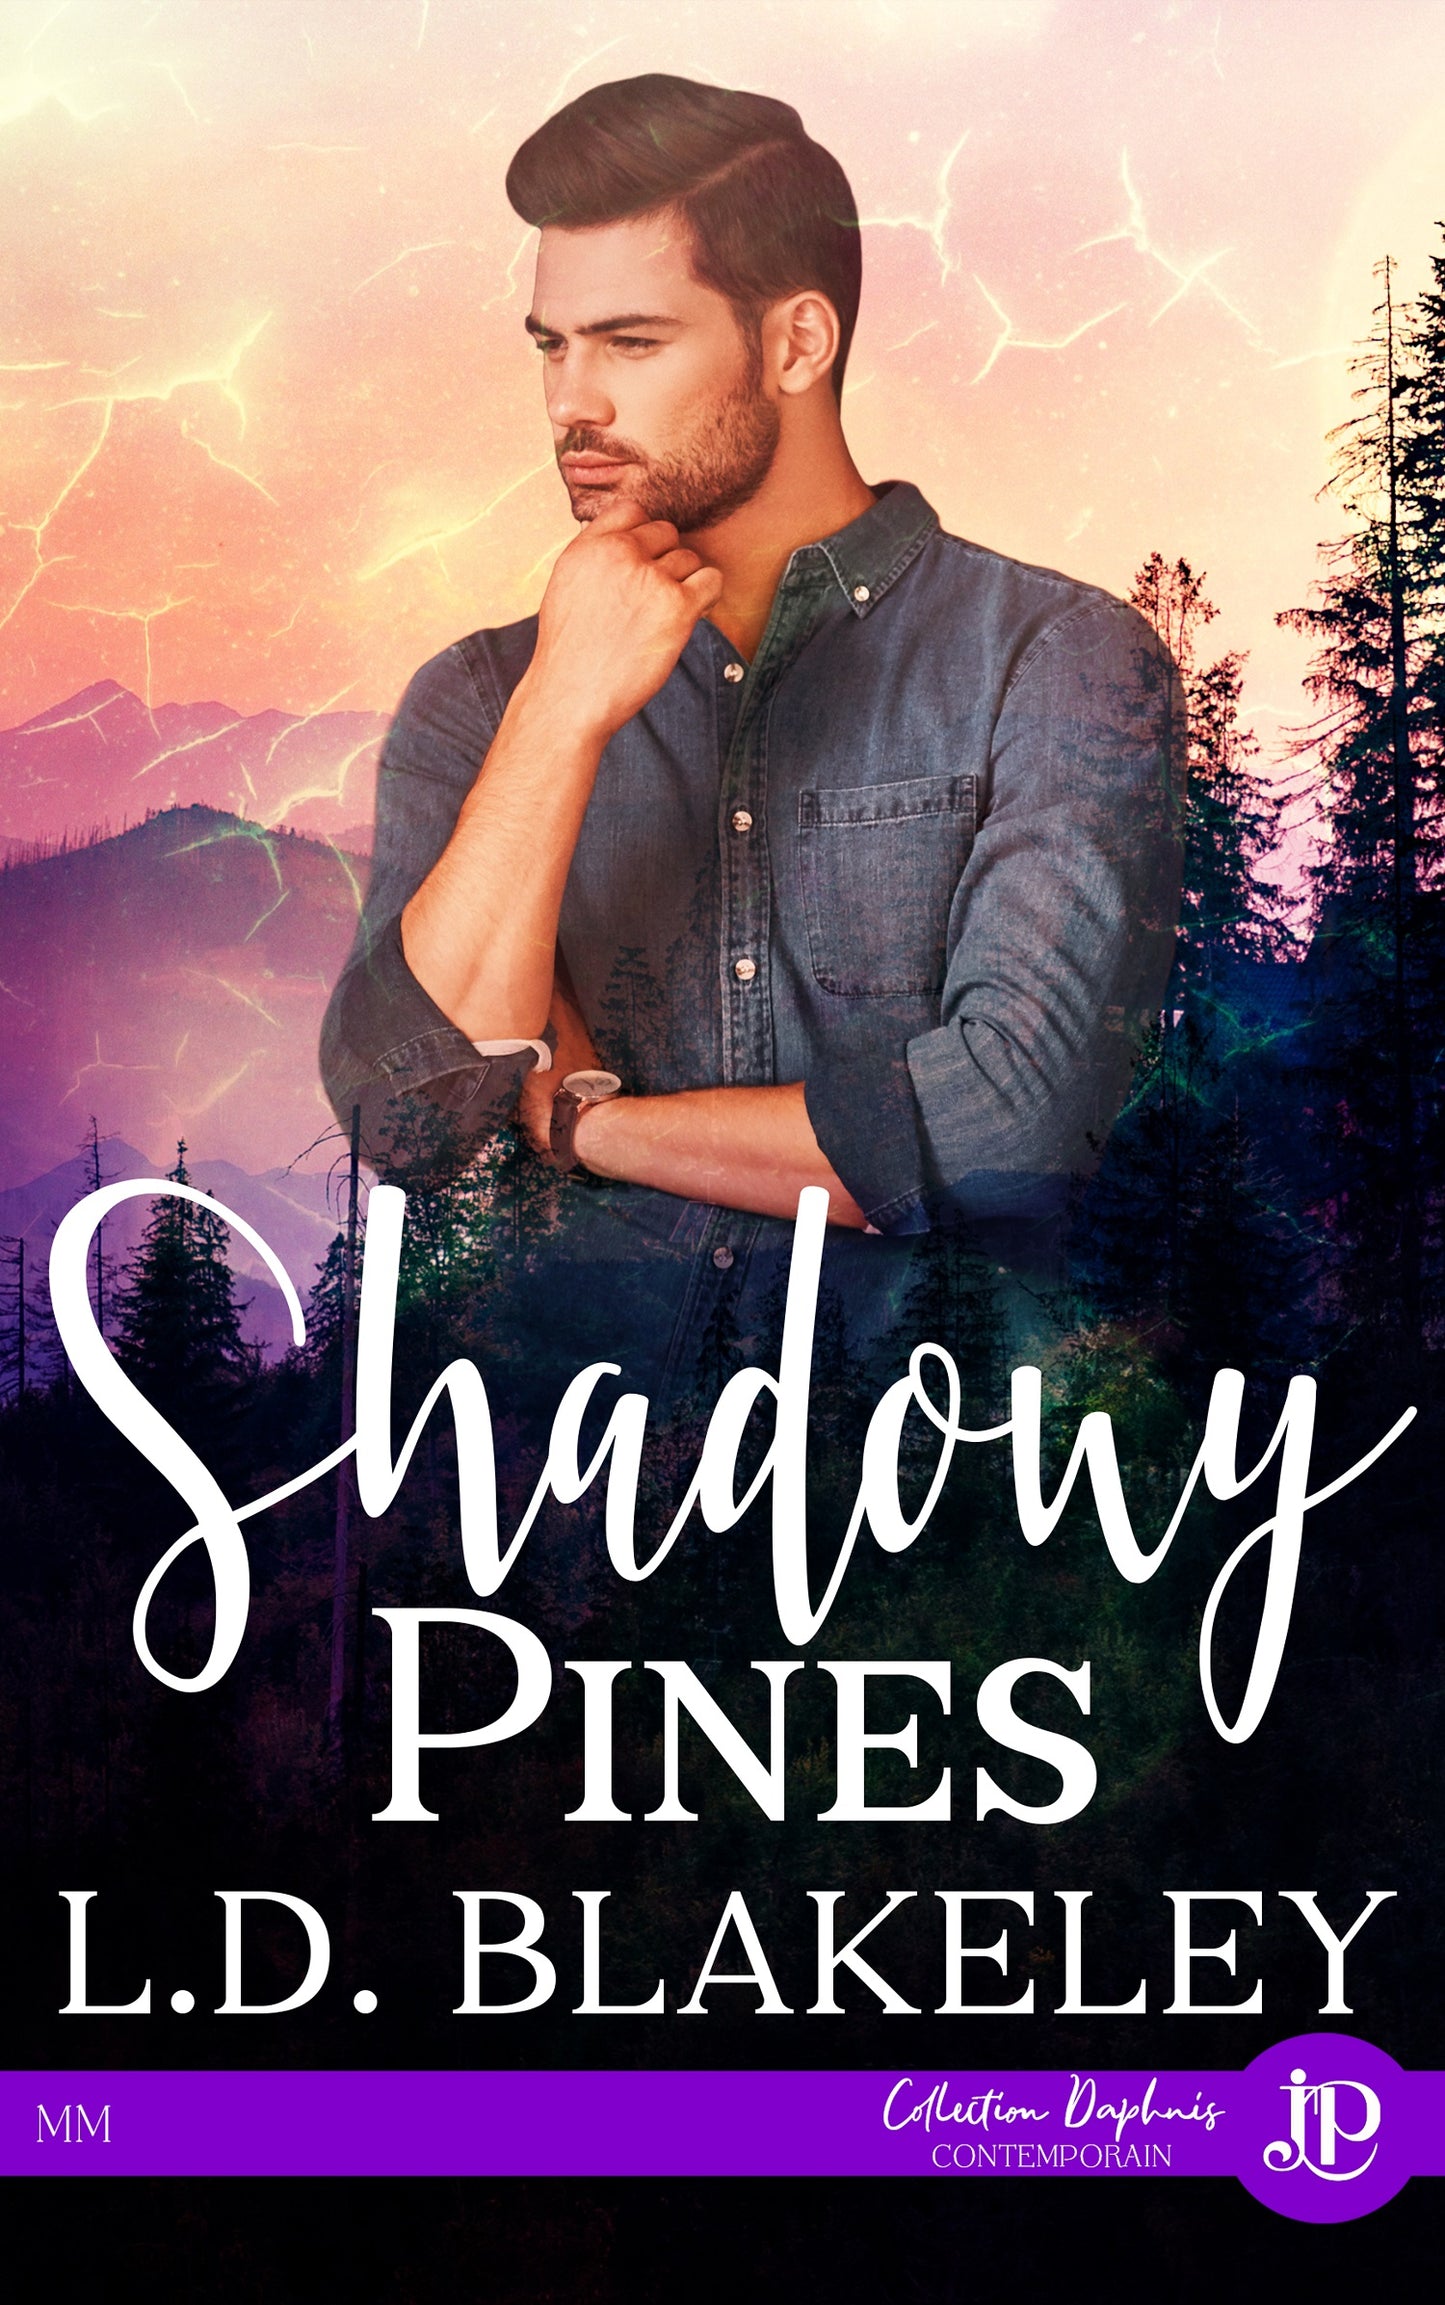 Shadowy Pines